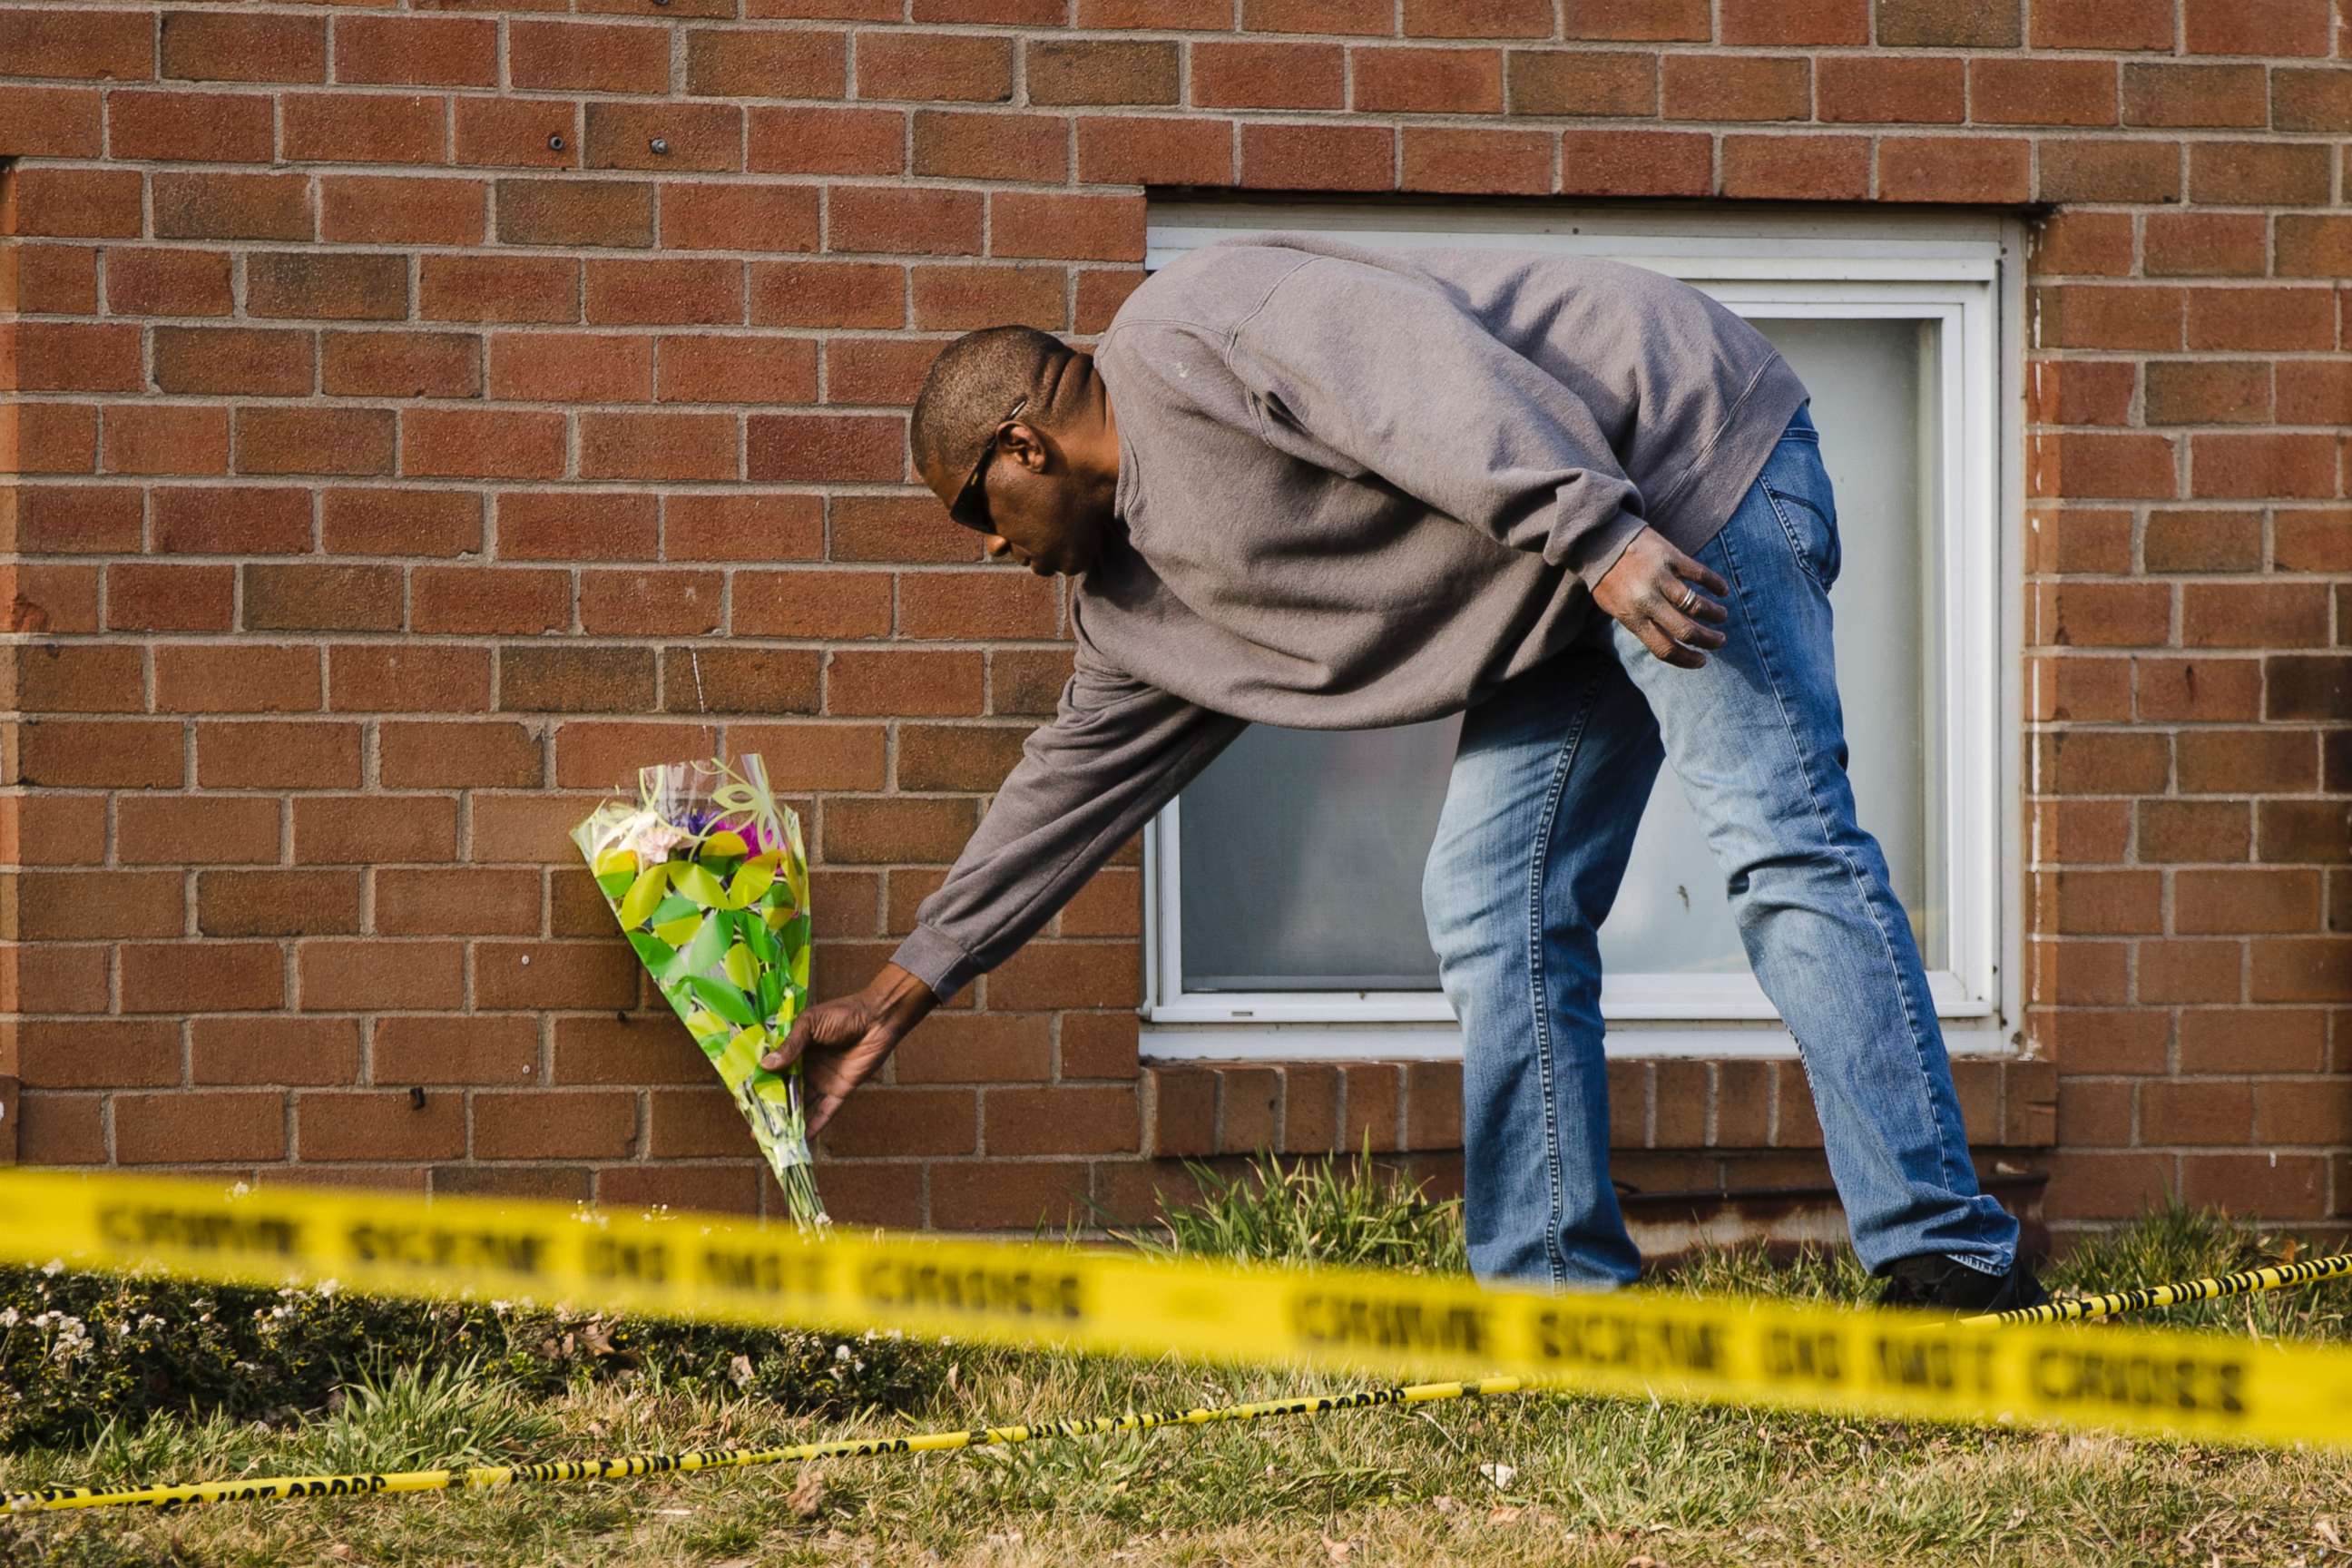 PHOTO: A man places flowers at the Robert Morris Apartments in Morrisville, Pa., Feb. 26, 2019.